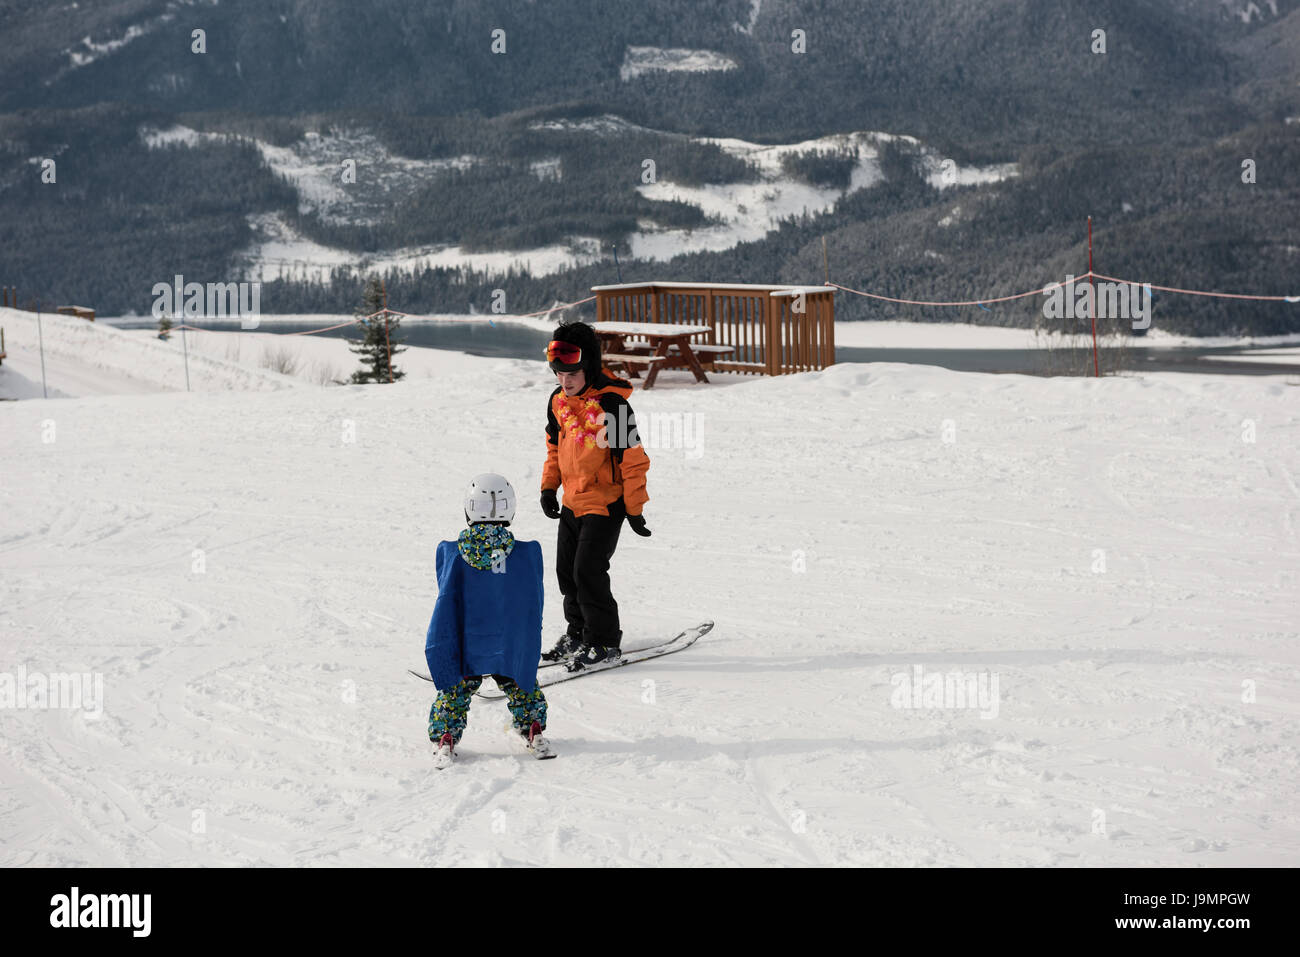 Little boy learning to ski with instructor on snowy slope in ski resort Stock Photo